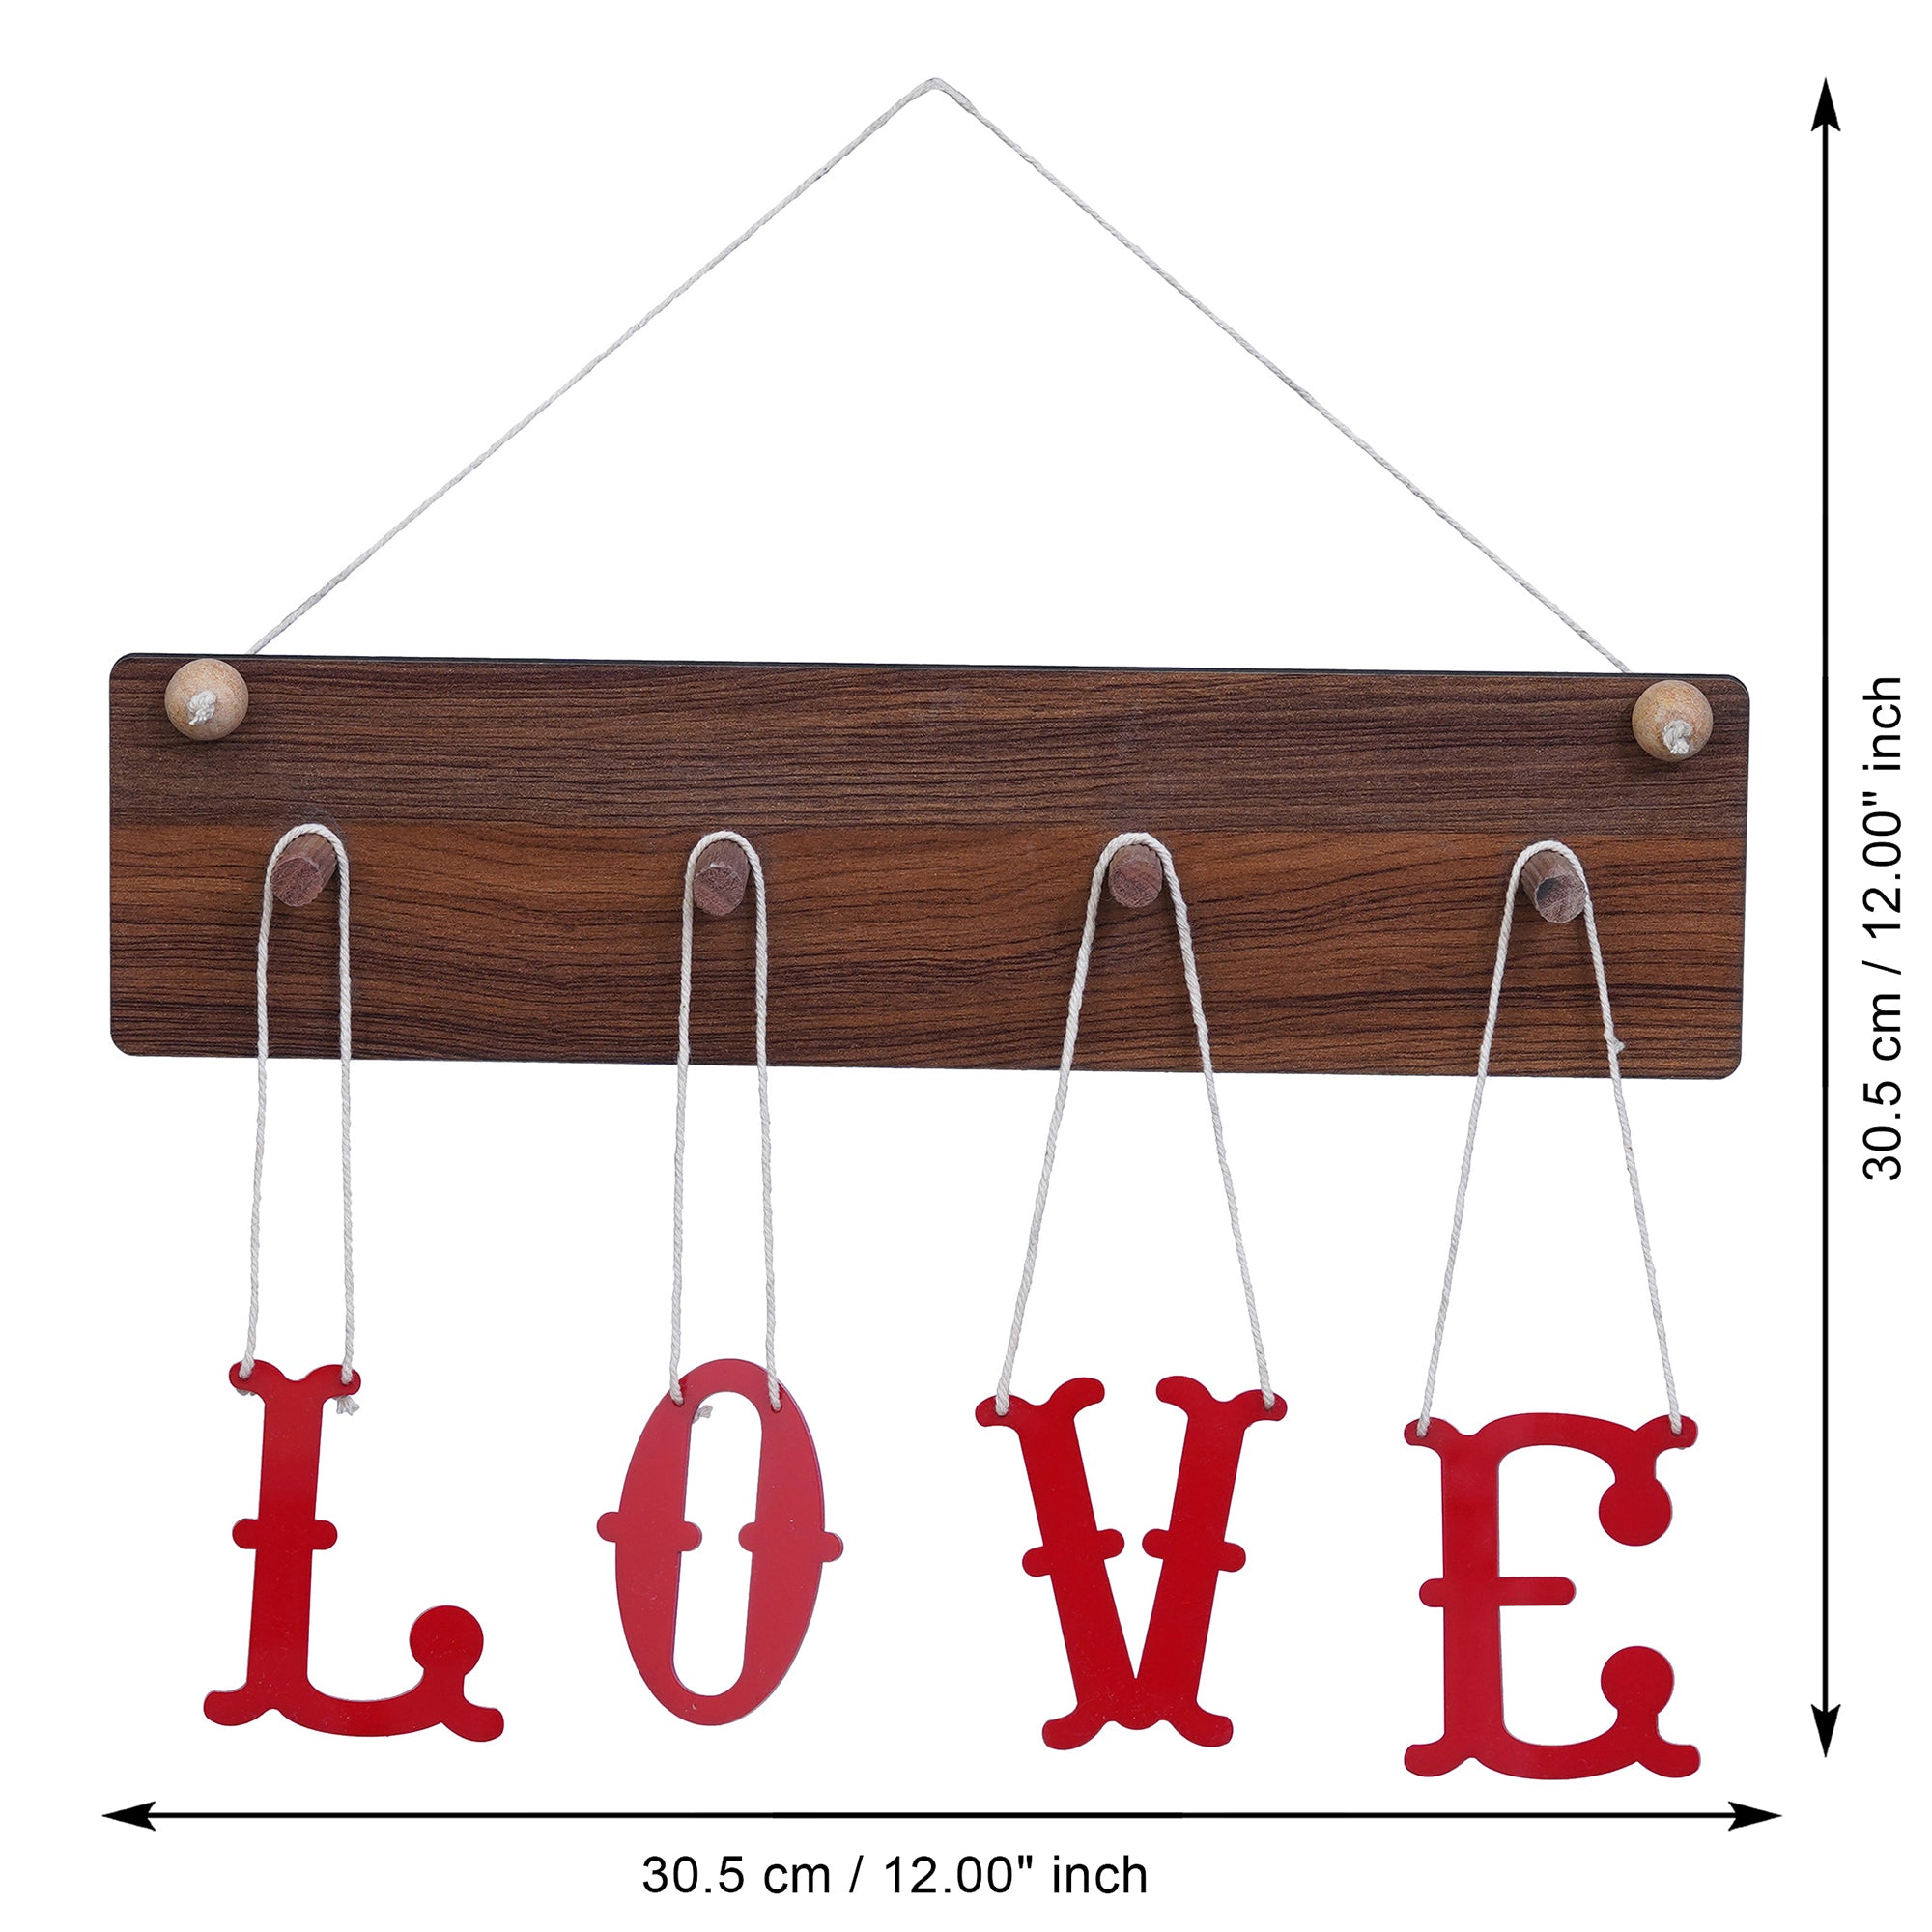 Brown & Red "LOVE" Sign Wooden Wall Hanging Showpiece 3